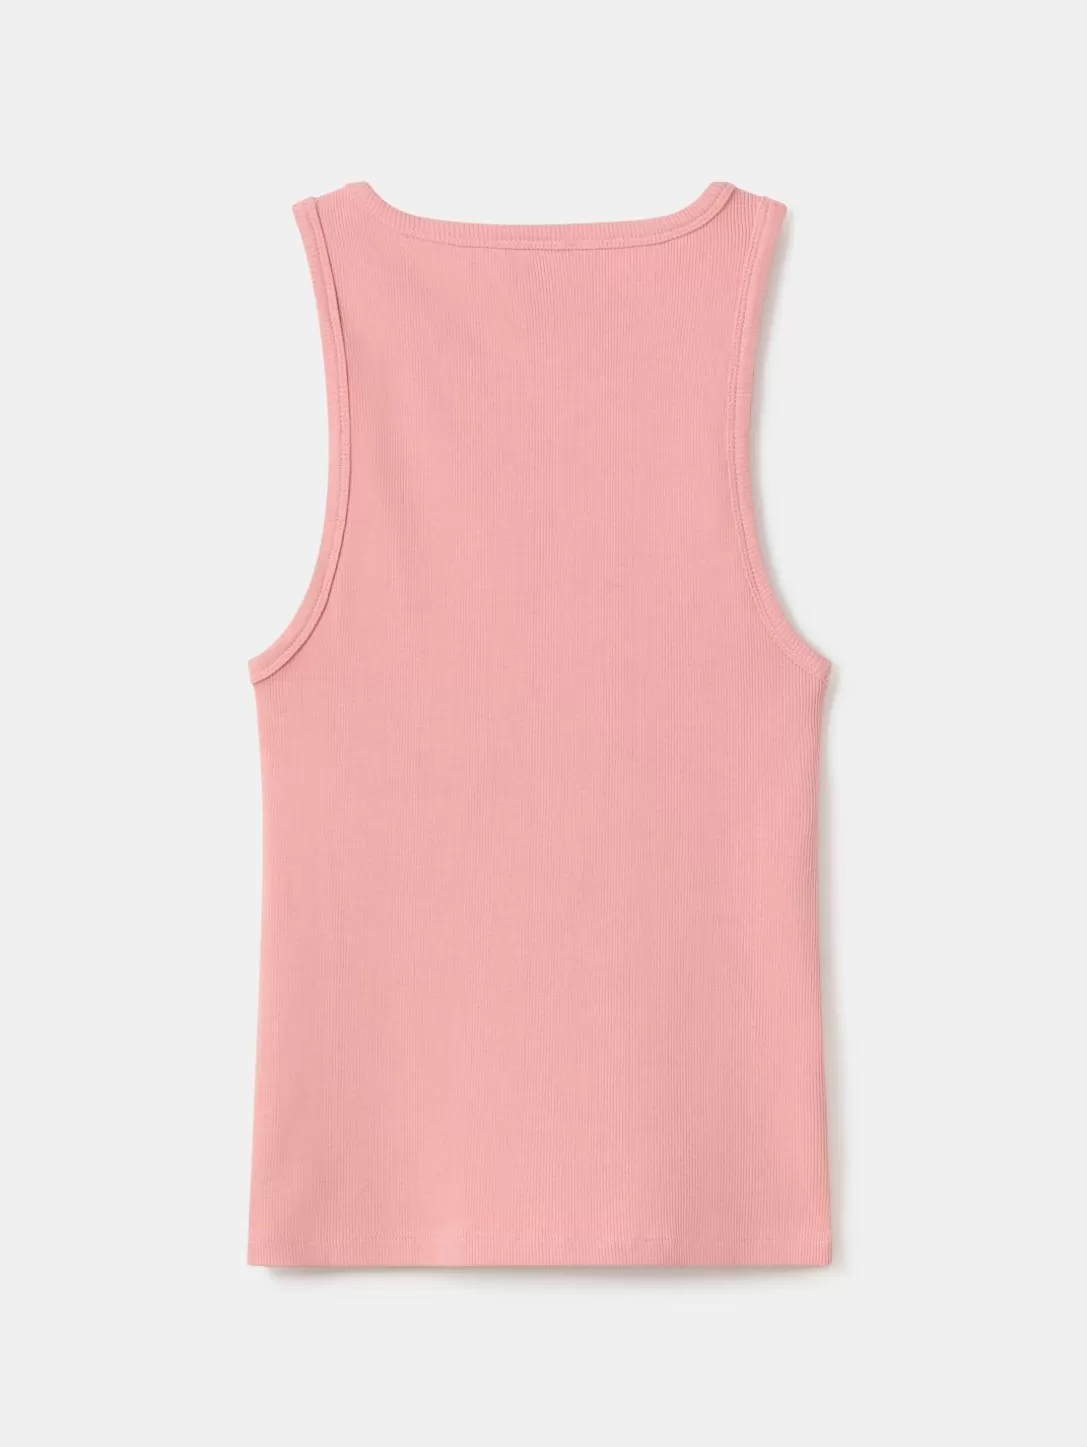 HOFF Top Cayman Pink Clearance